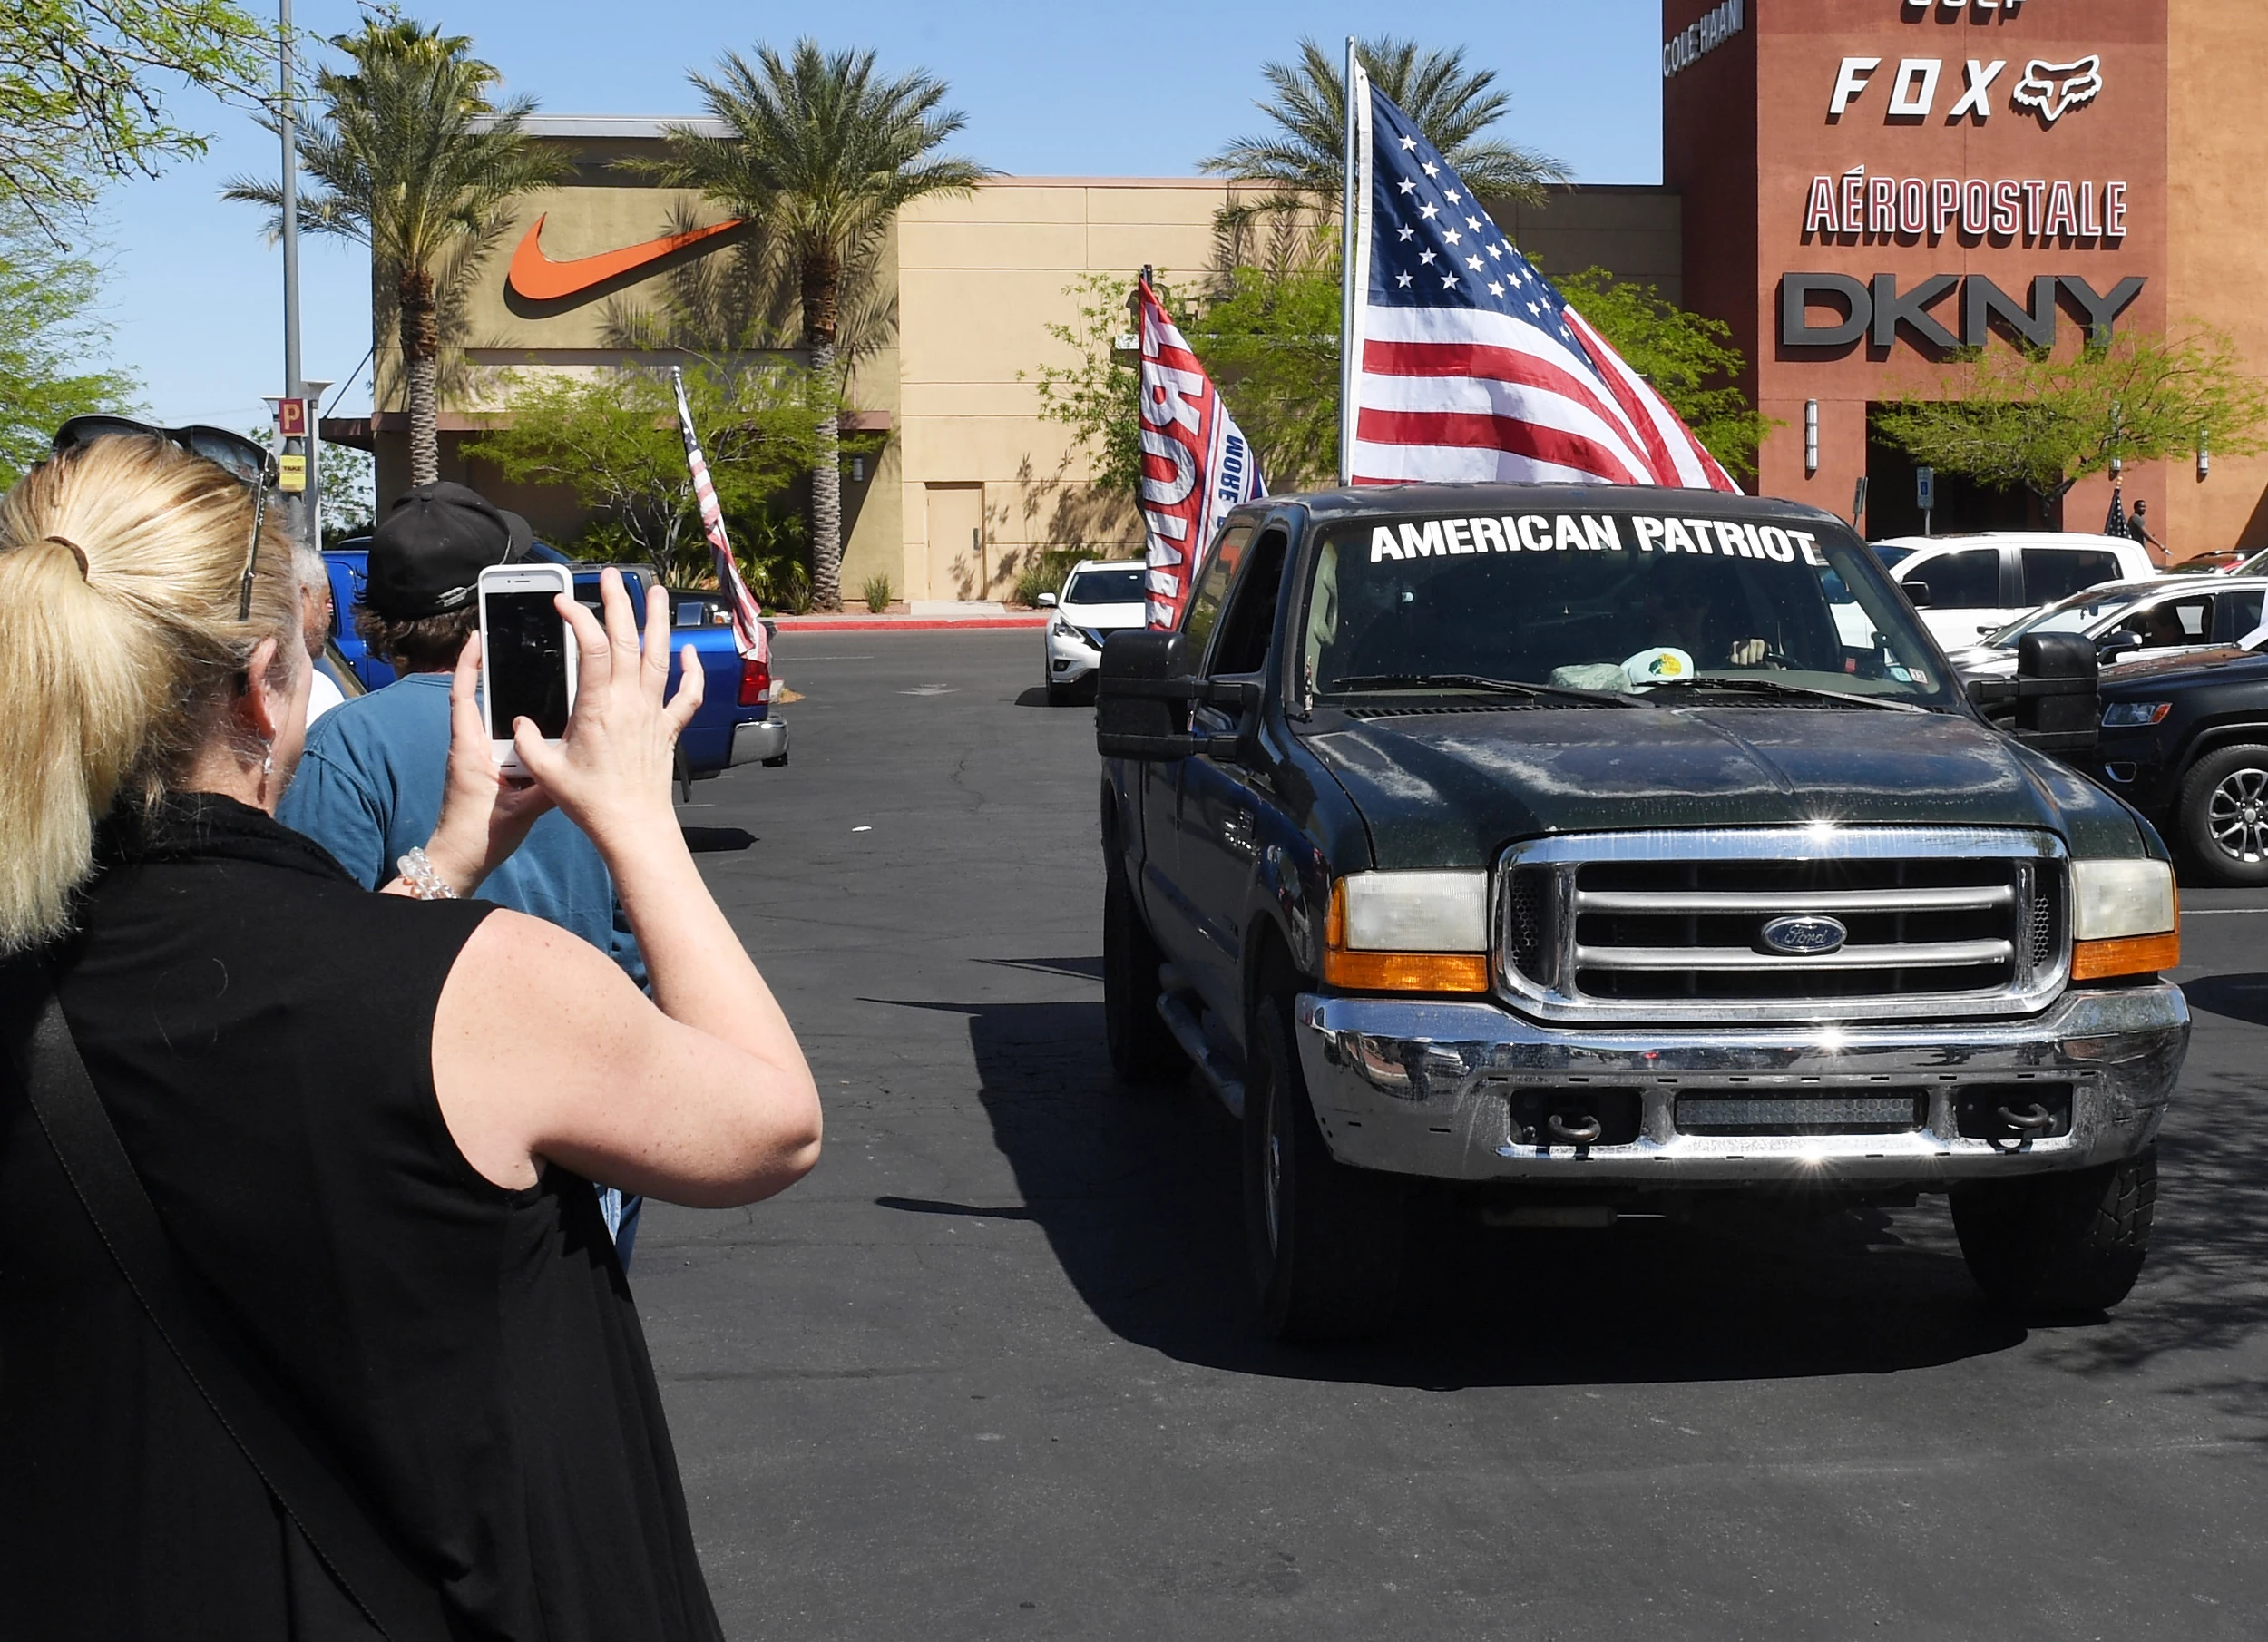 Is Flying a Flag From Your Car Illegal?